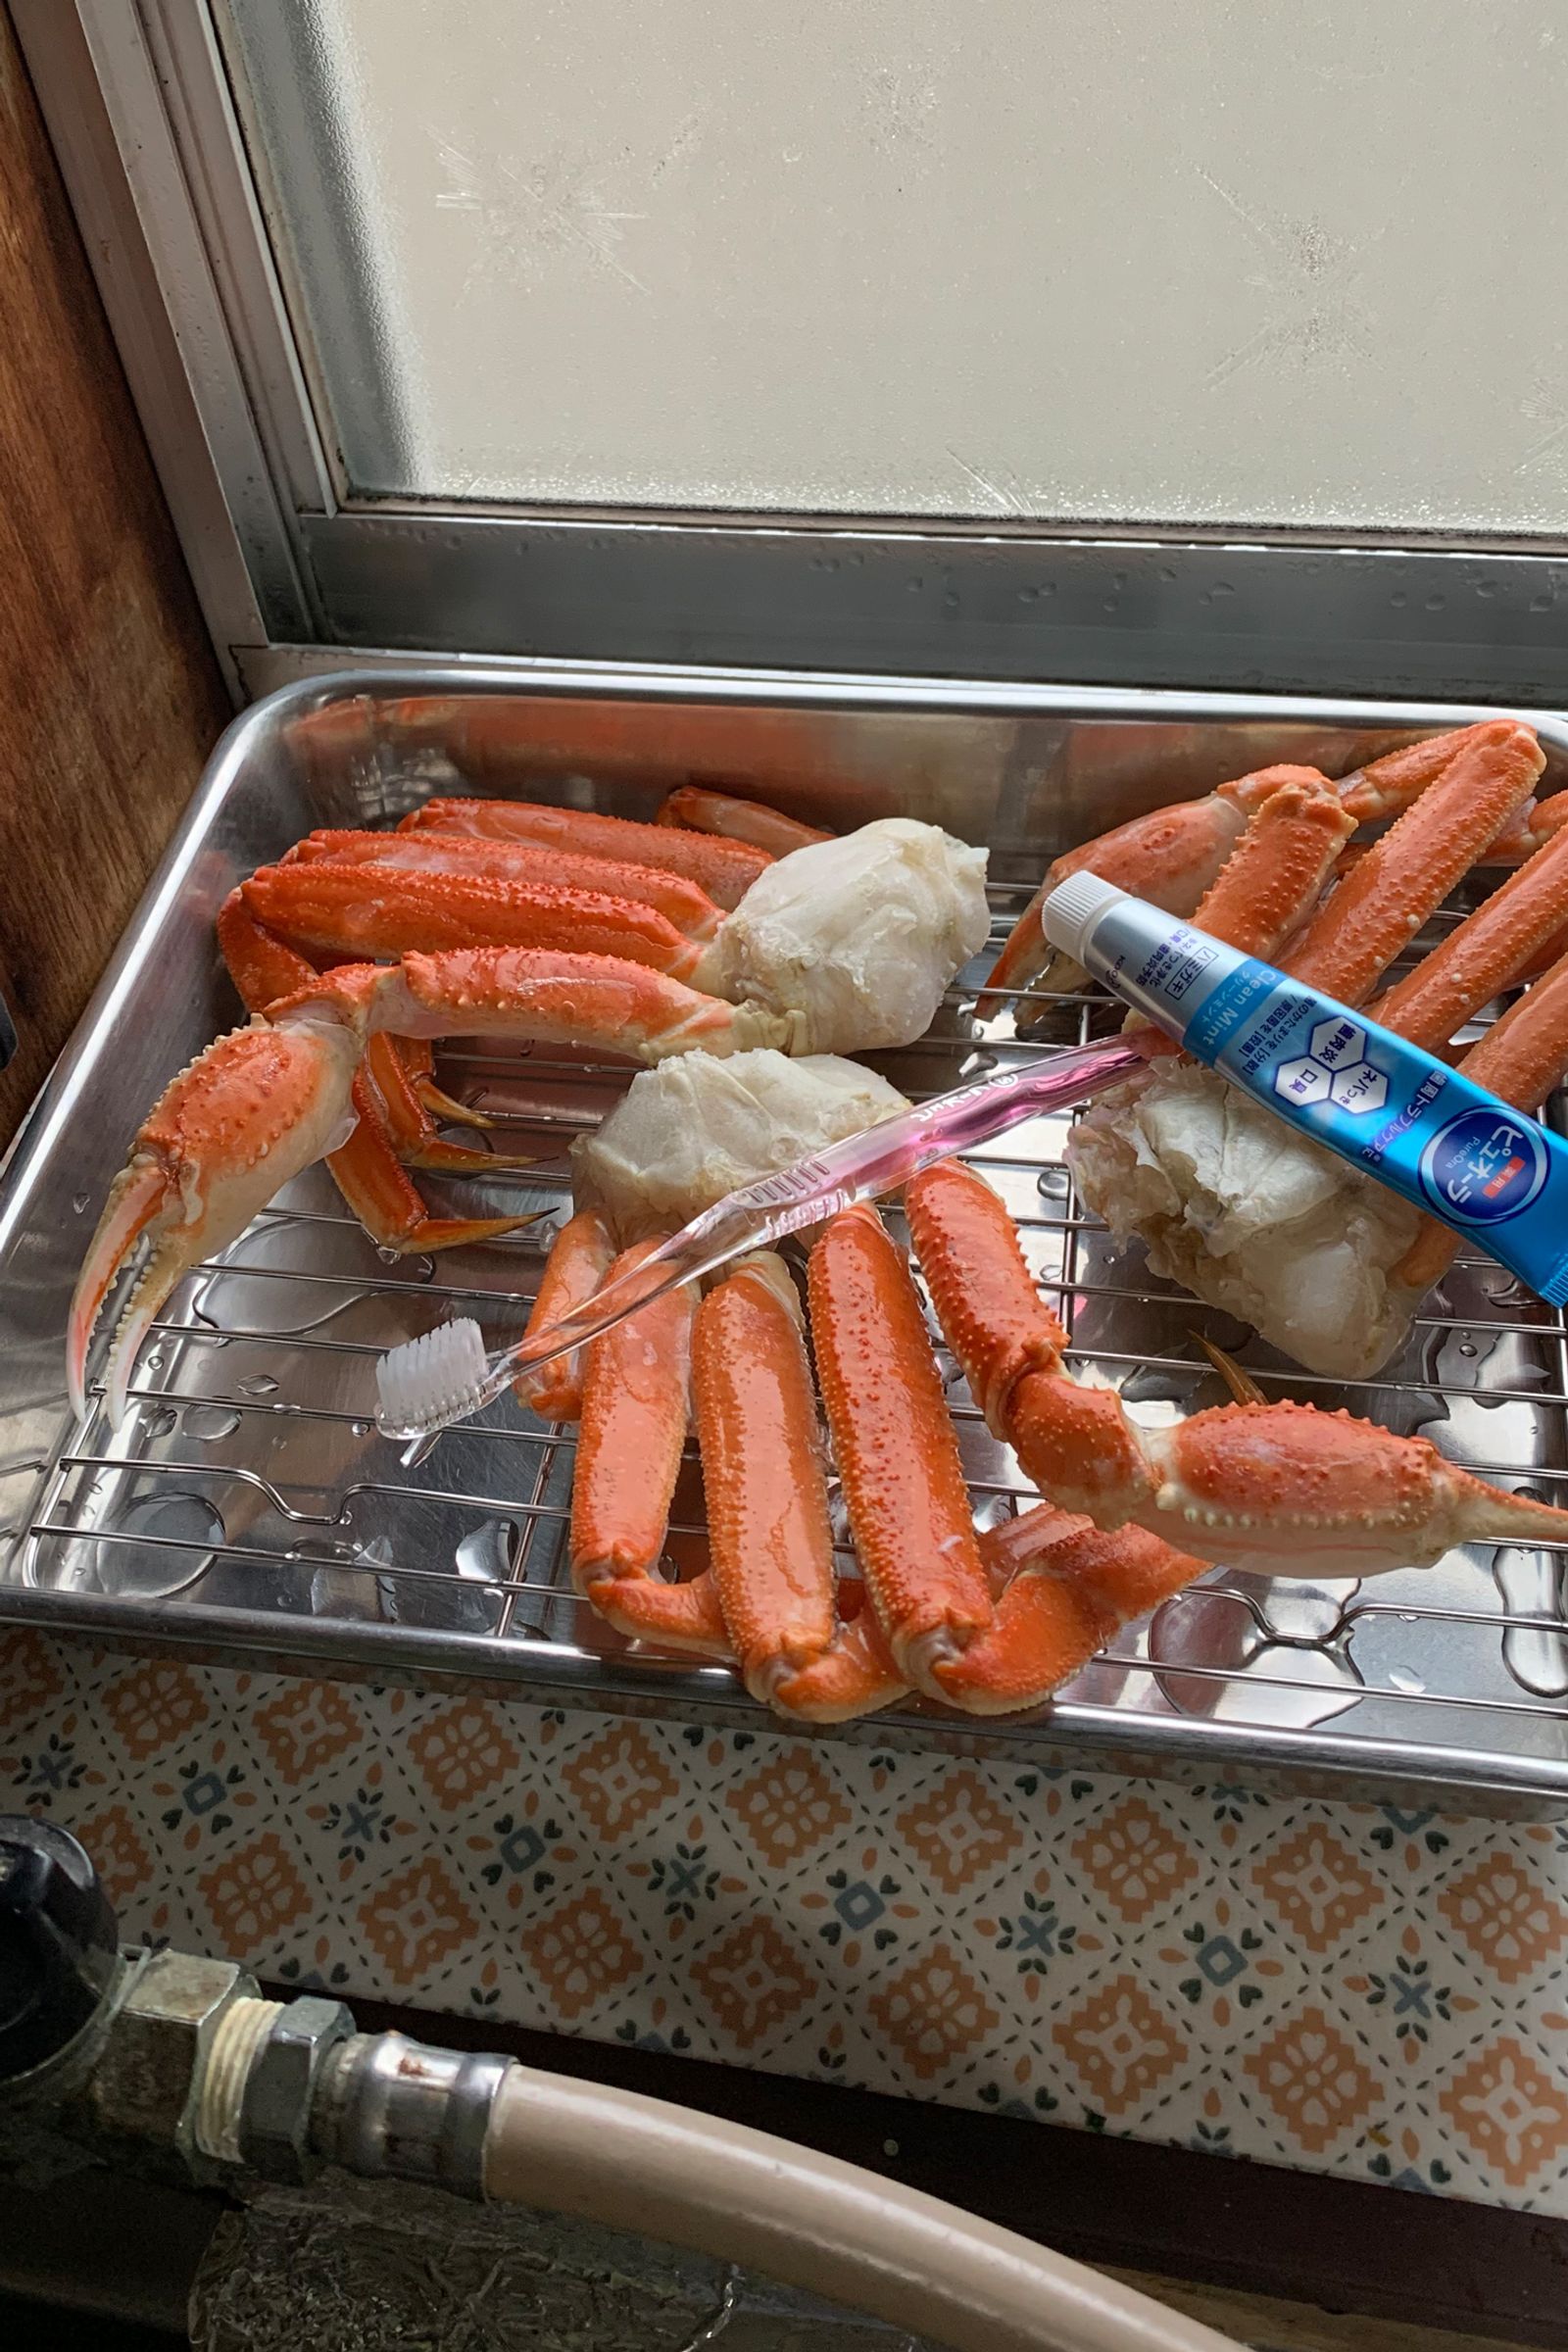 © Kenta Nakamura - When I went back to my parents' house, a crab was used as a toothbrush rest.